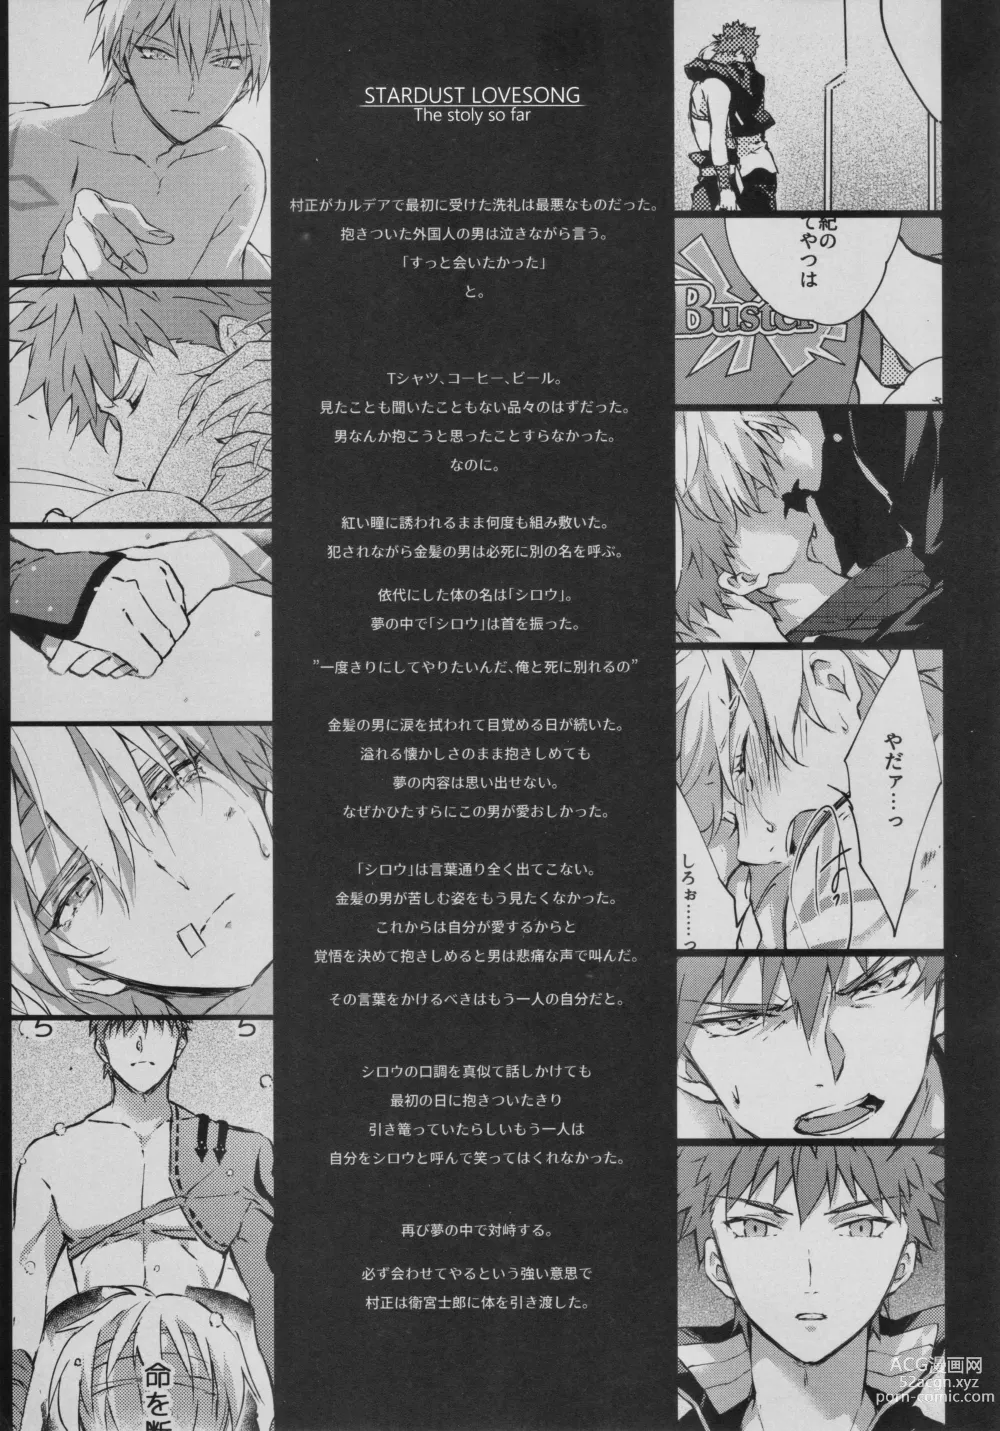 Page 8 of doujinshi STARDUST LOVESONG encore special story 1st After 7 Days